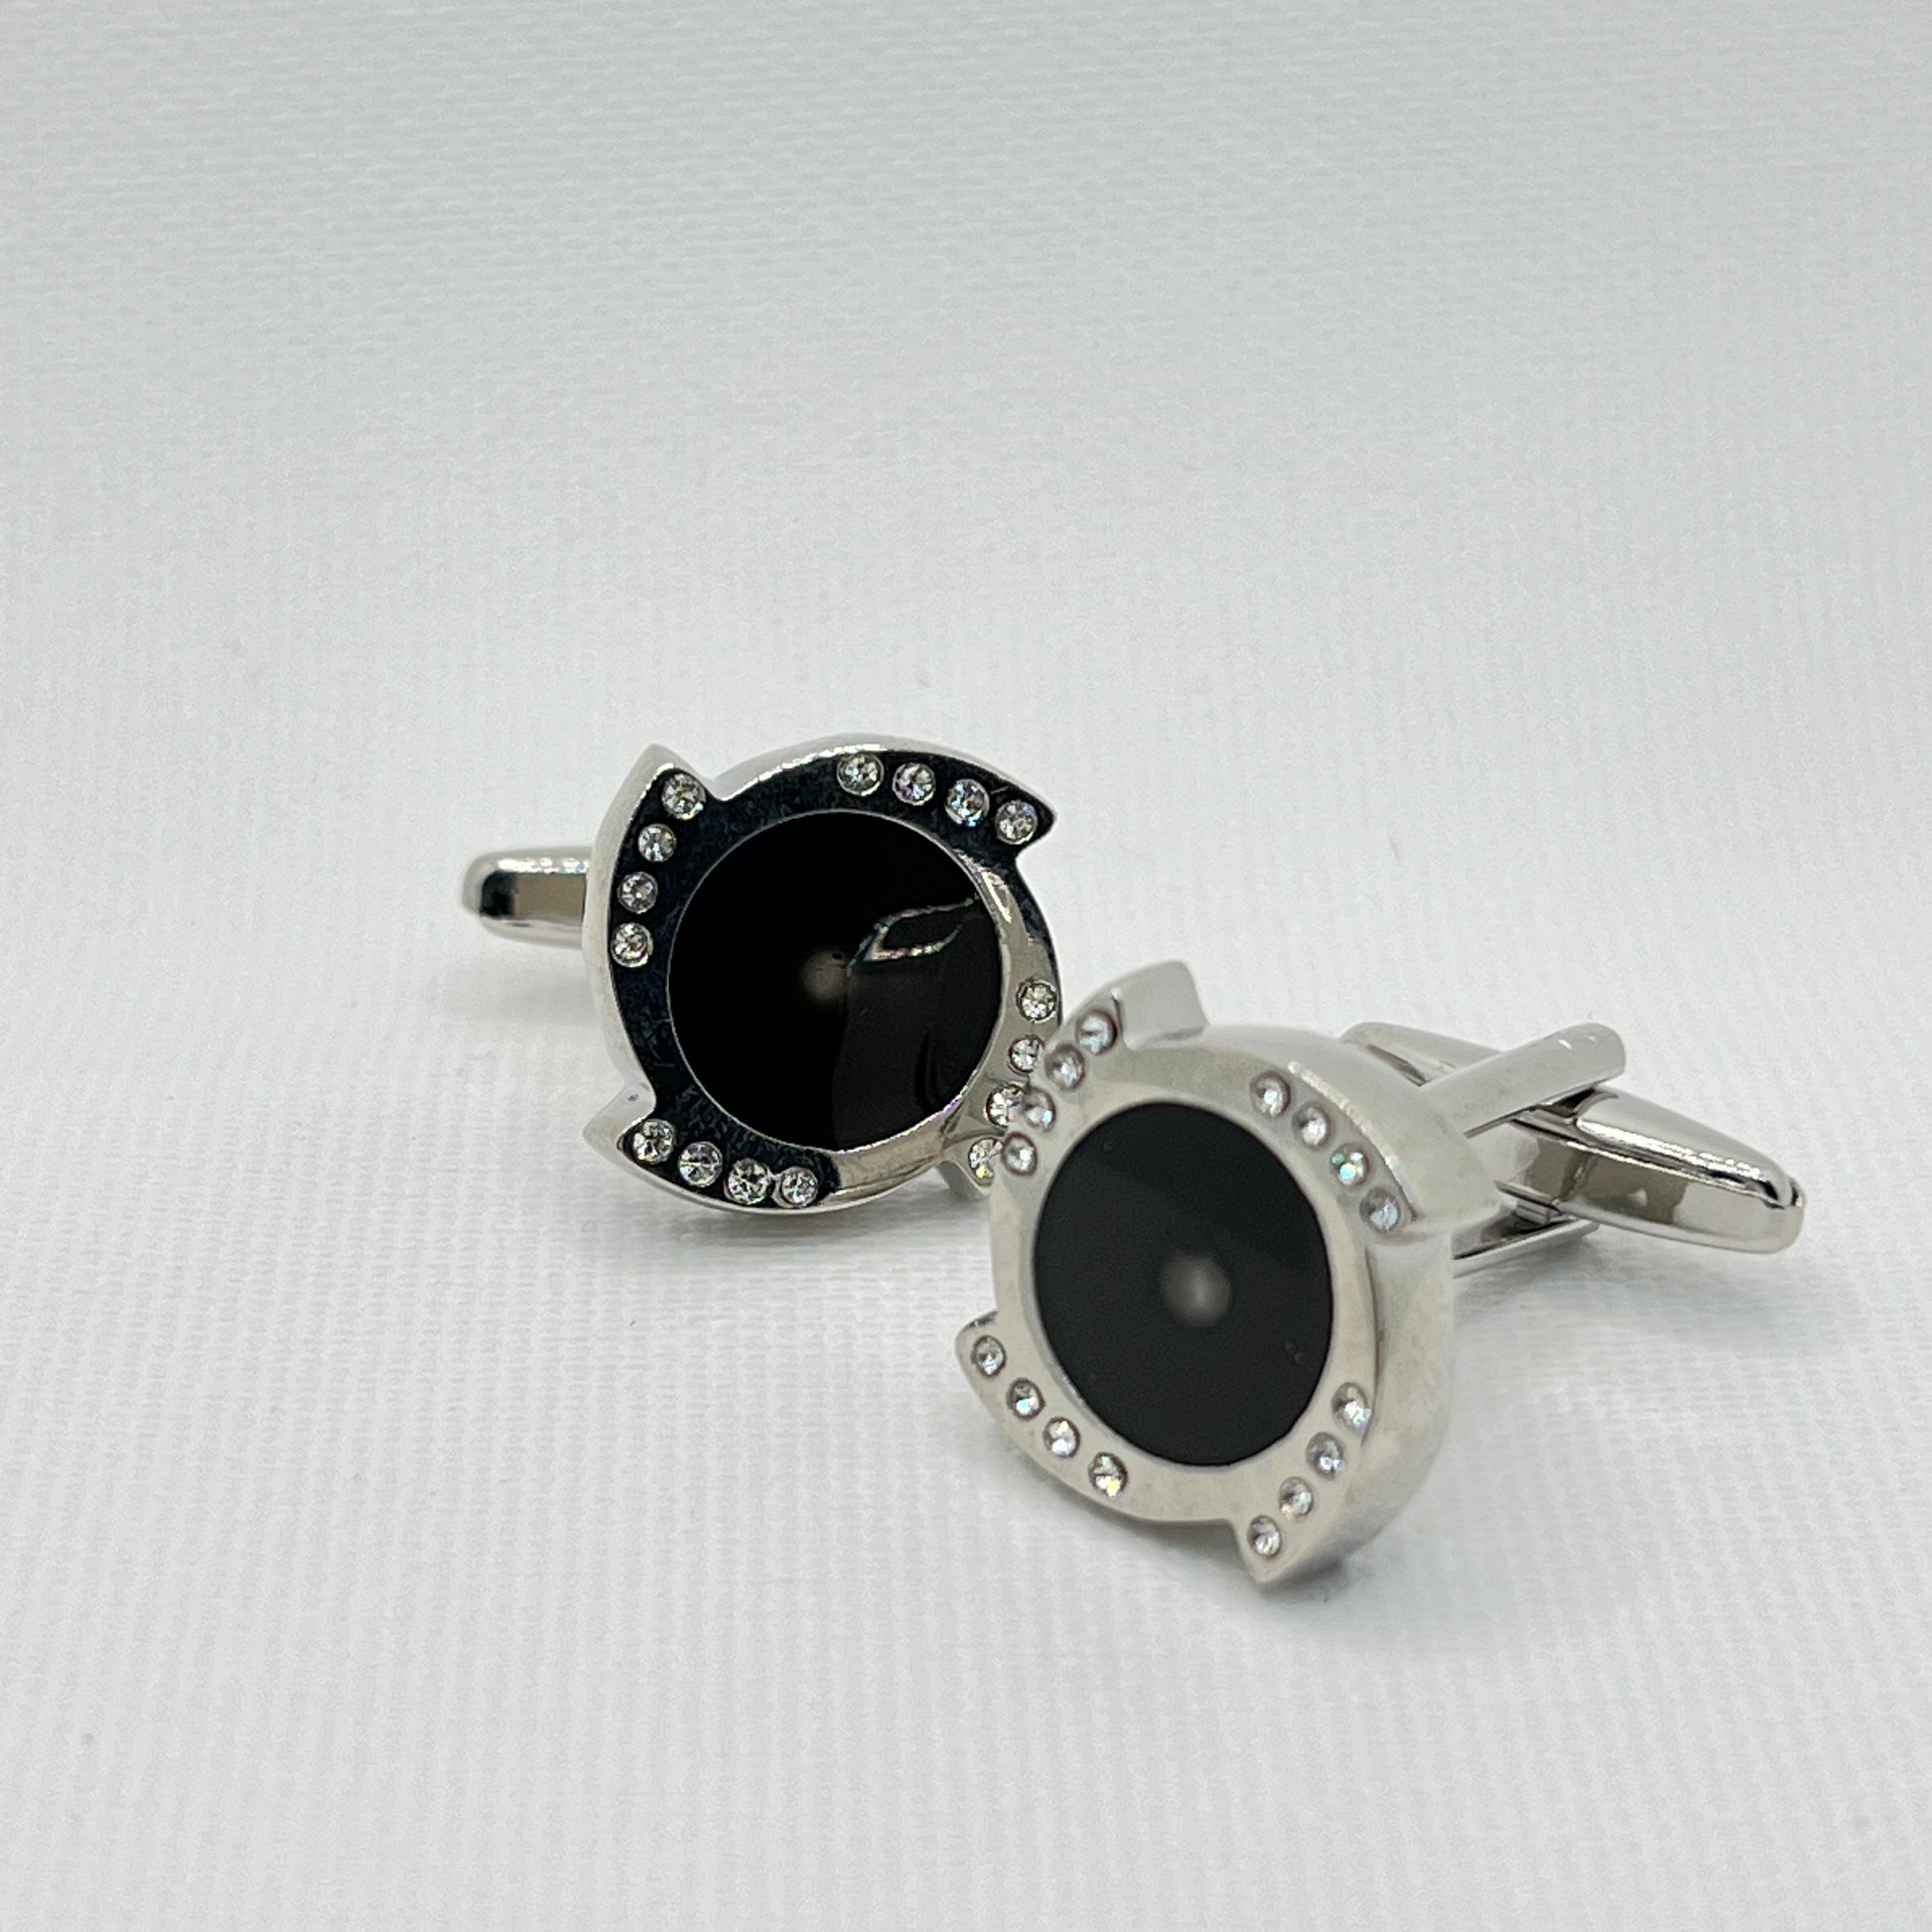 Tasker & Shaw | Luxury Menswear | Silver "clack" cufflinks with black centre and crystal detail